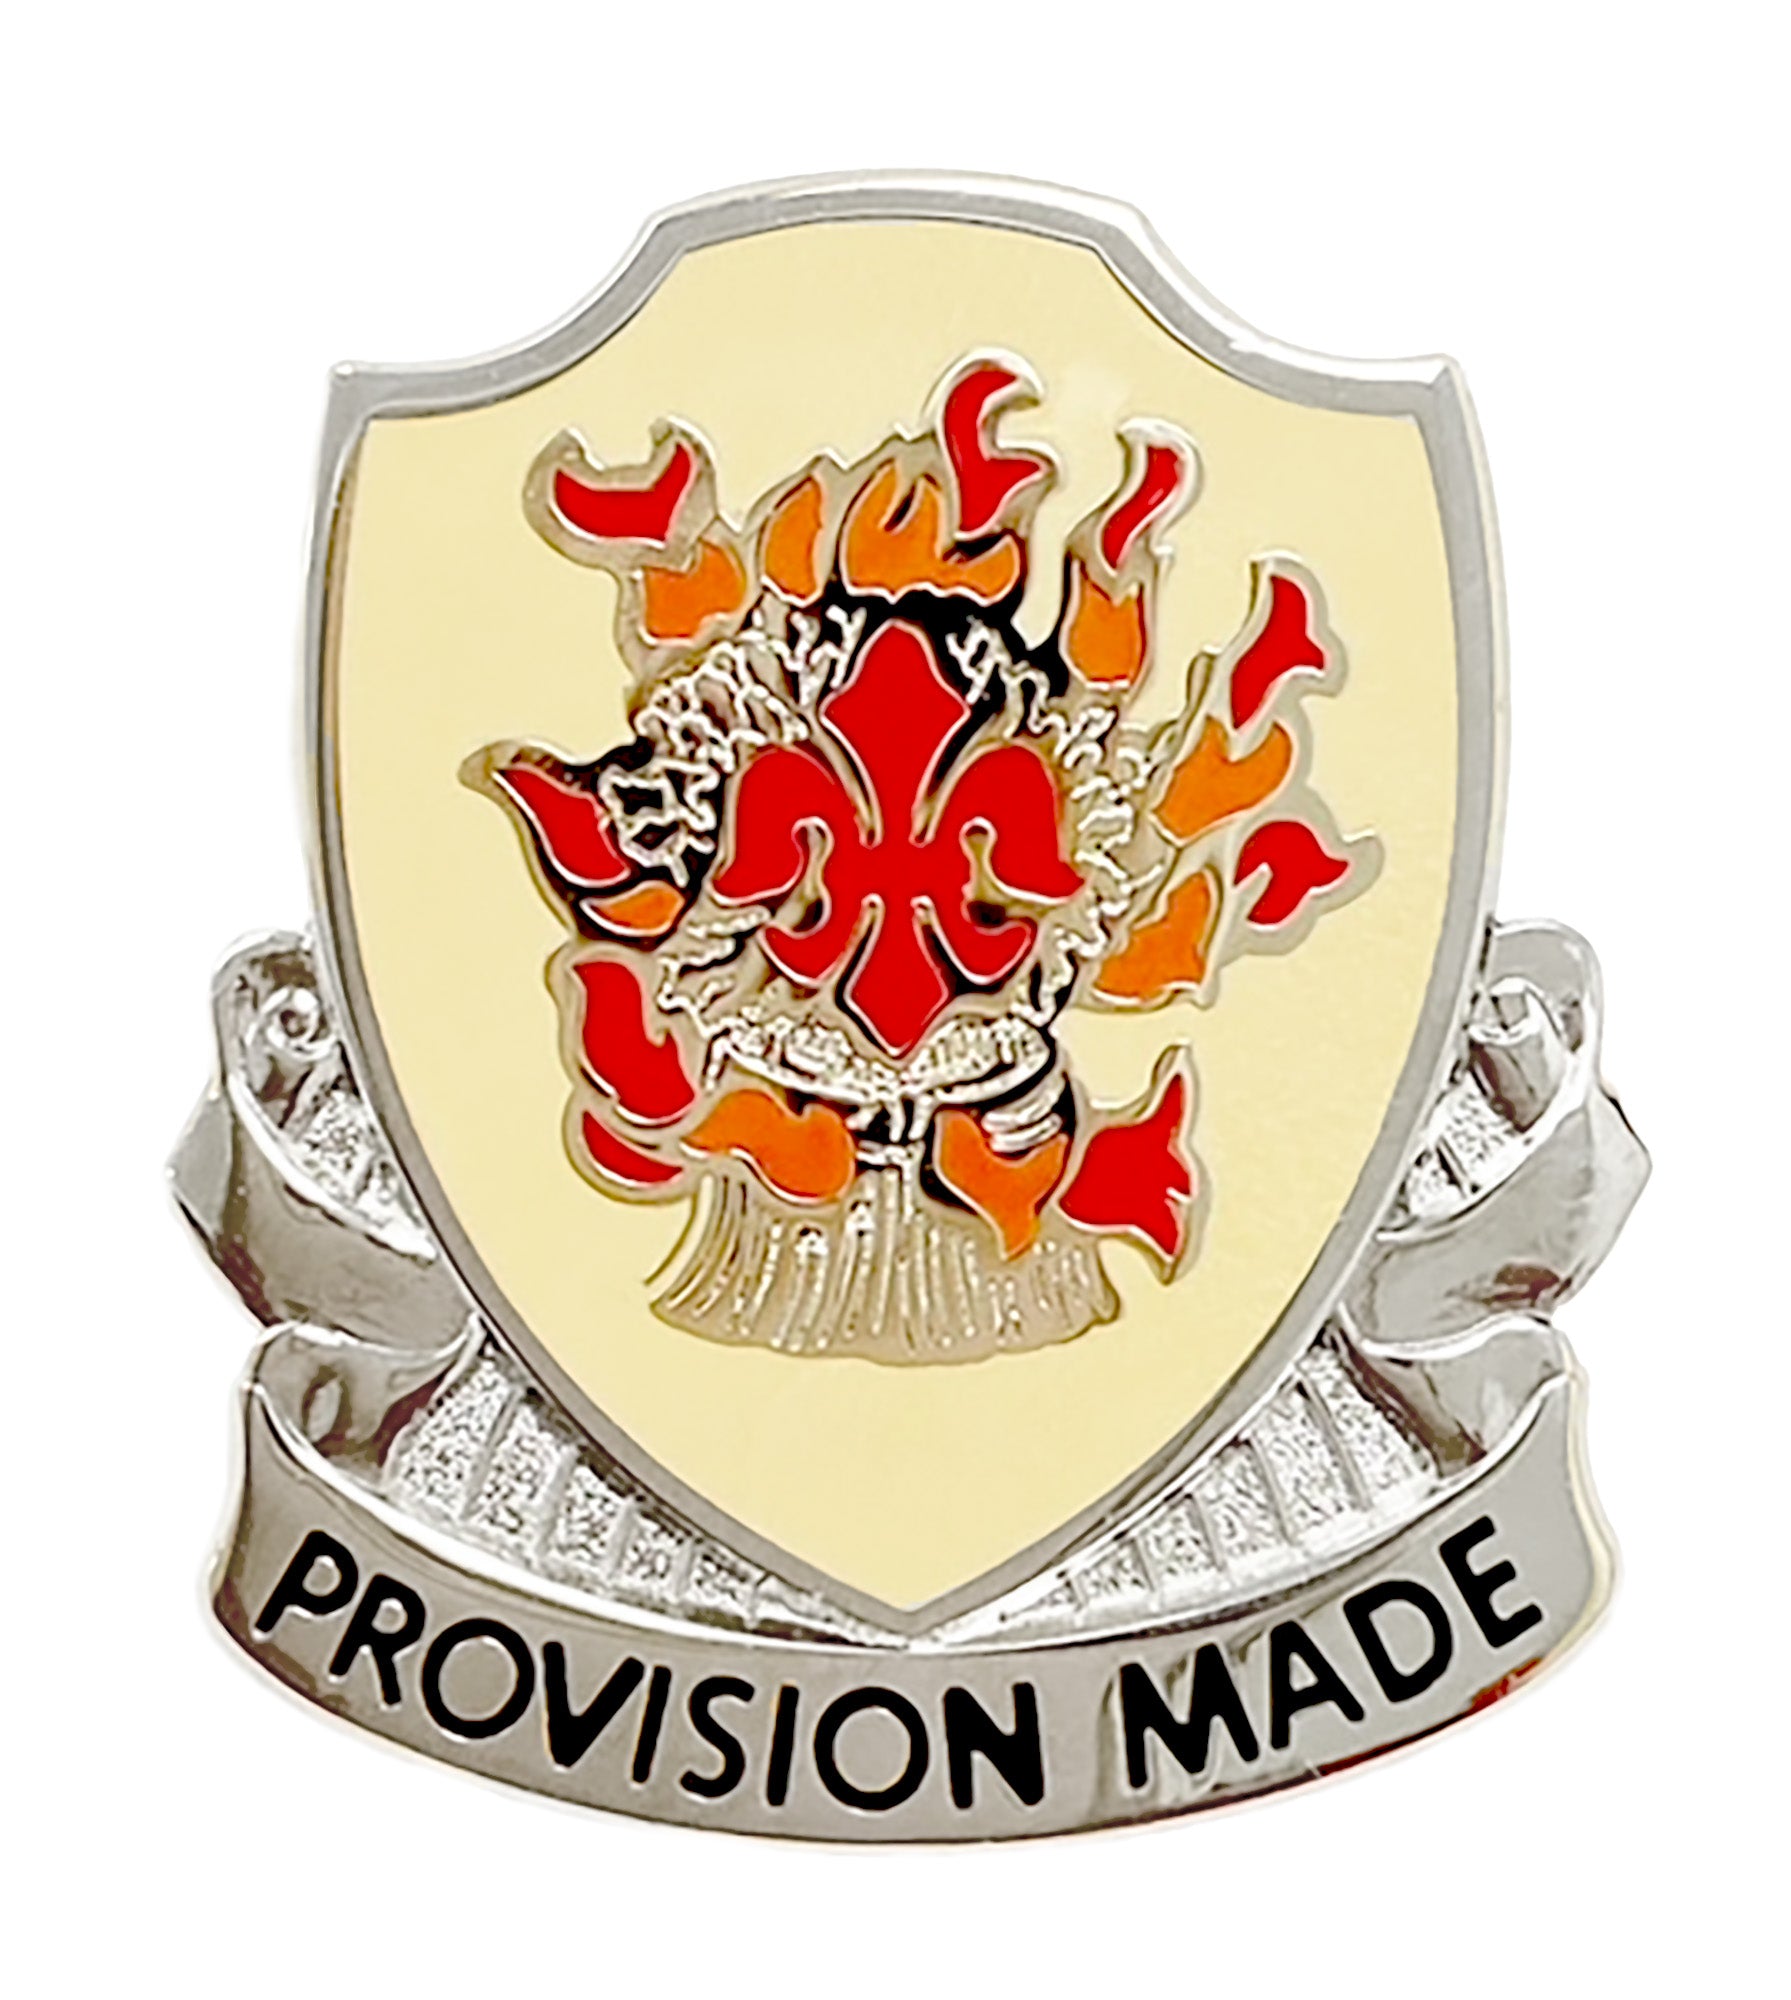 96th Support Battalion Crest "Provision Made" (each).